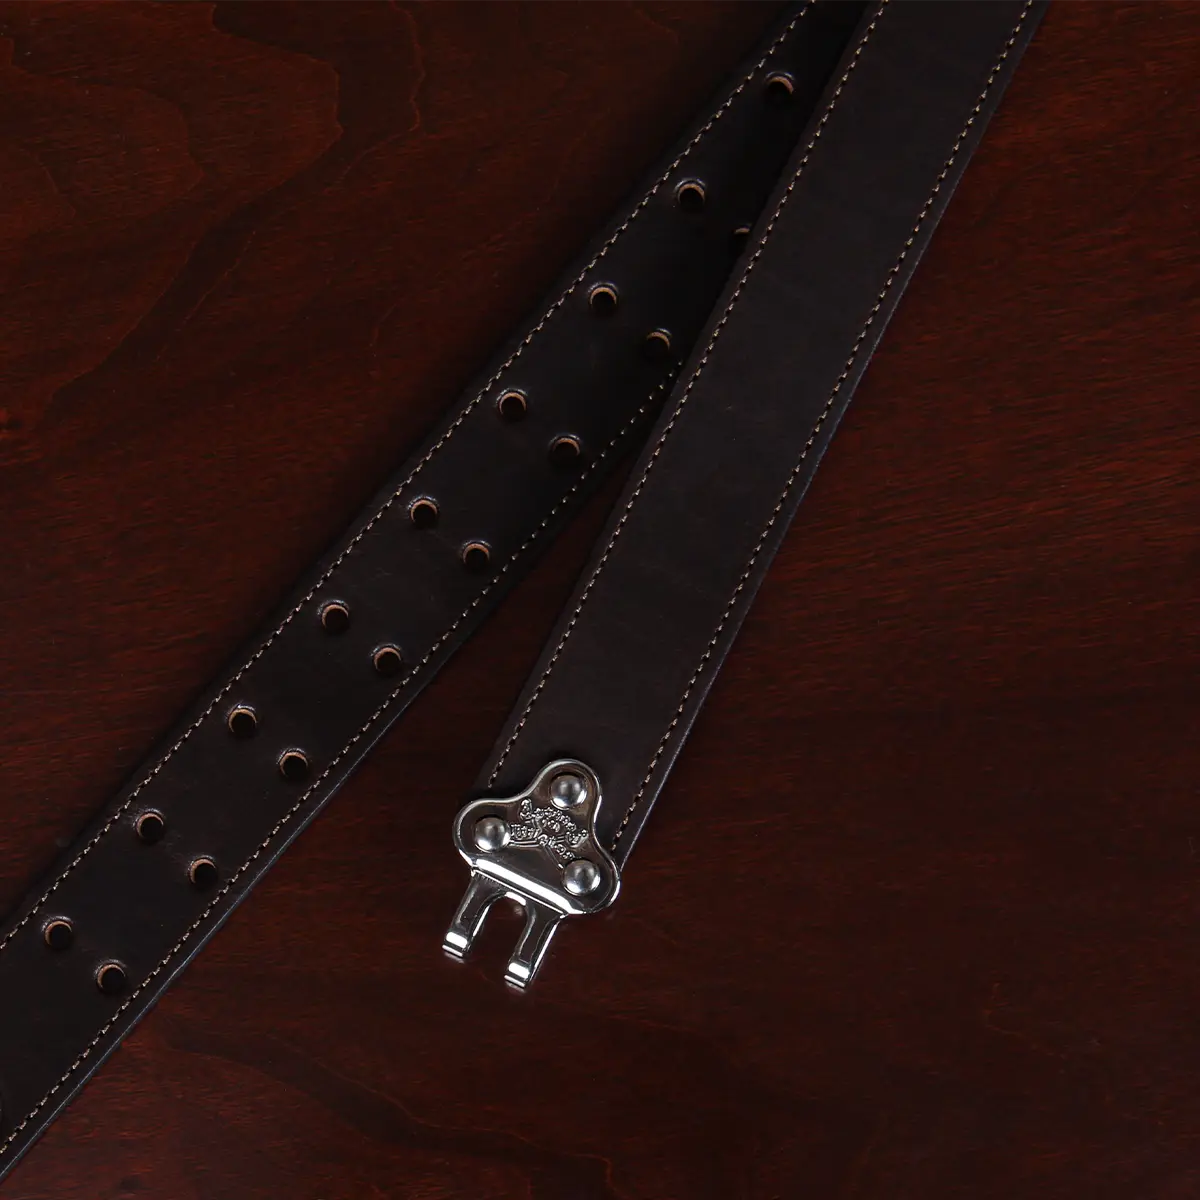 close-up view dark brown leather belt with nickel hardware on wood table